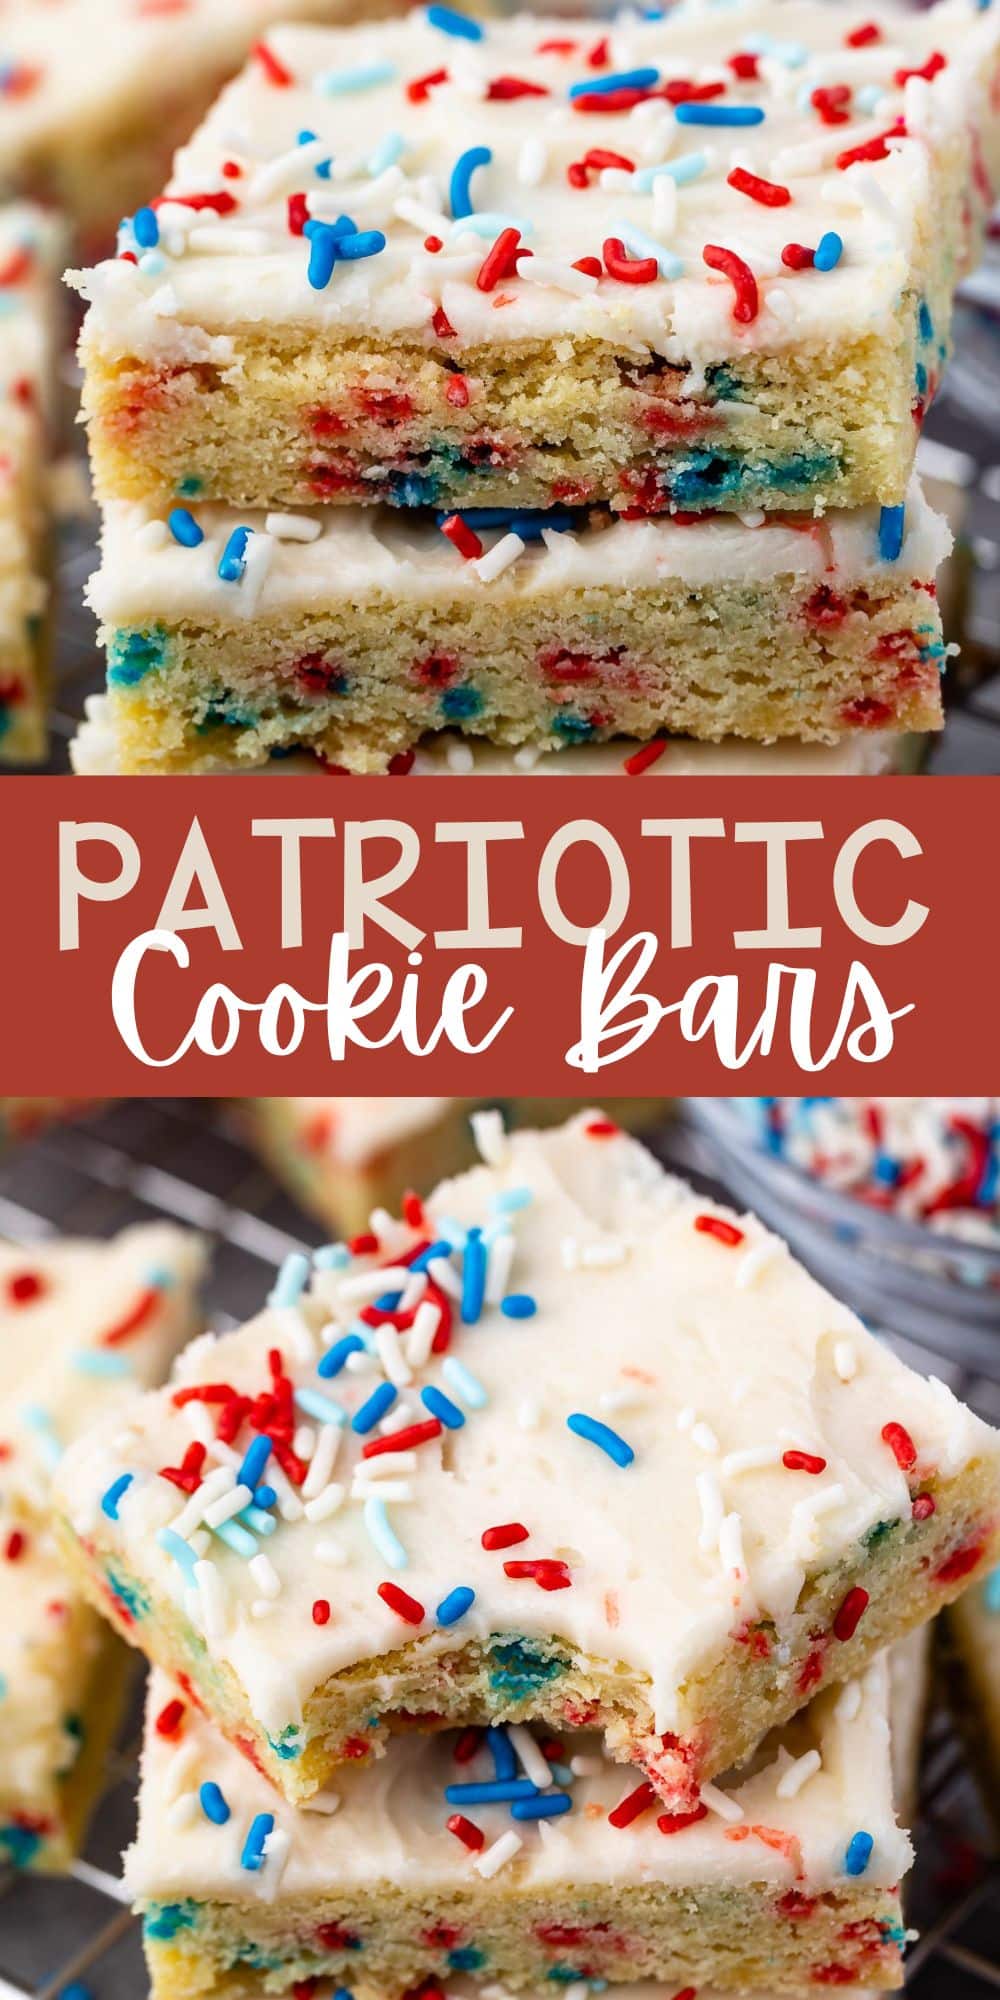 two photos of stacked sugar cookie bars with vanilla frosting and red white and blue sprinkles on top with words on the image.